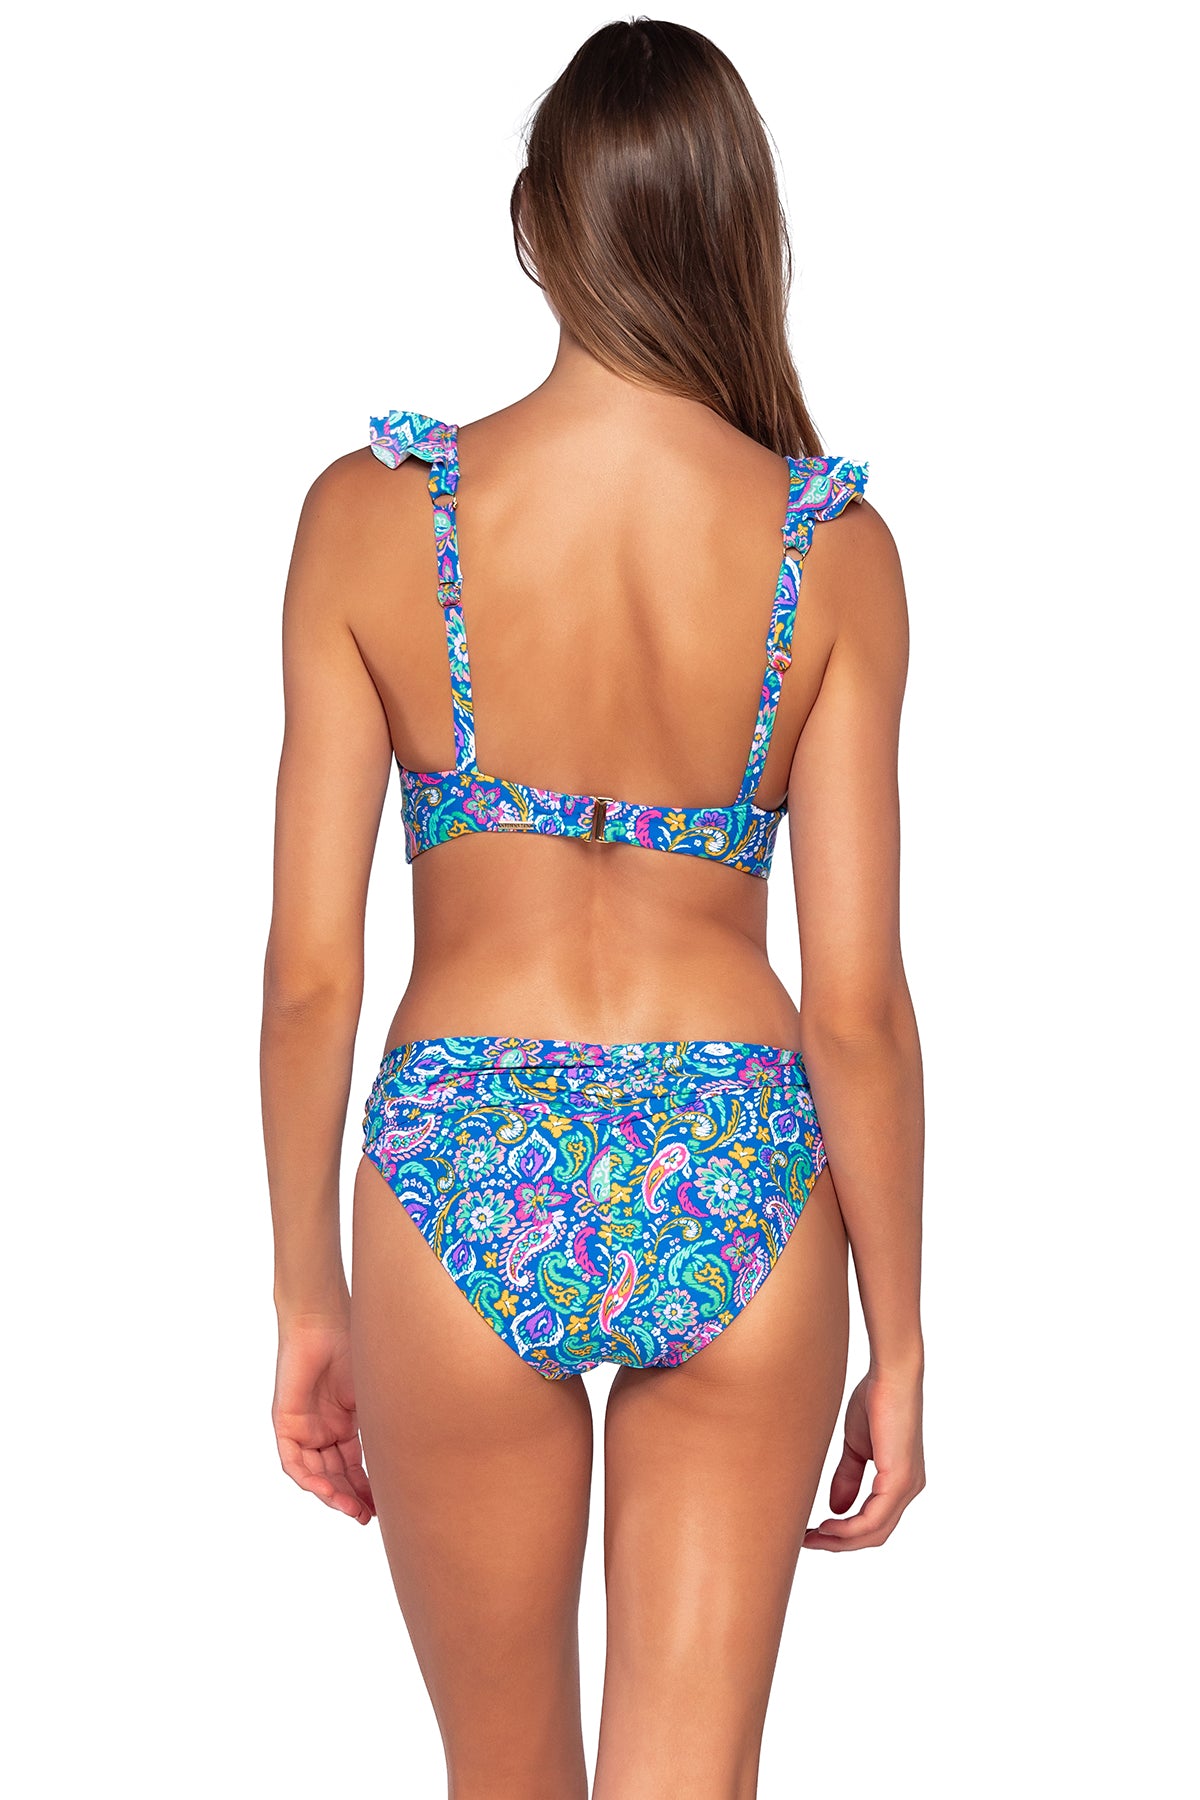 Back view of Sunsets Persian Sky Unforgettable Bottom with matching Willa Wireless bikini top